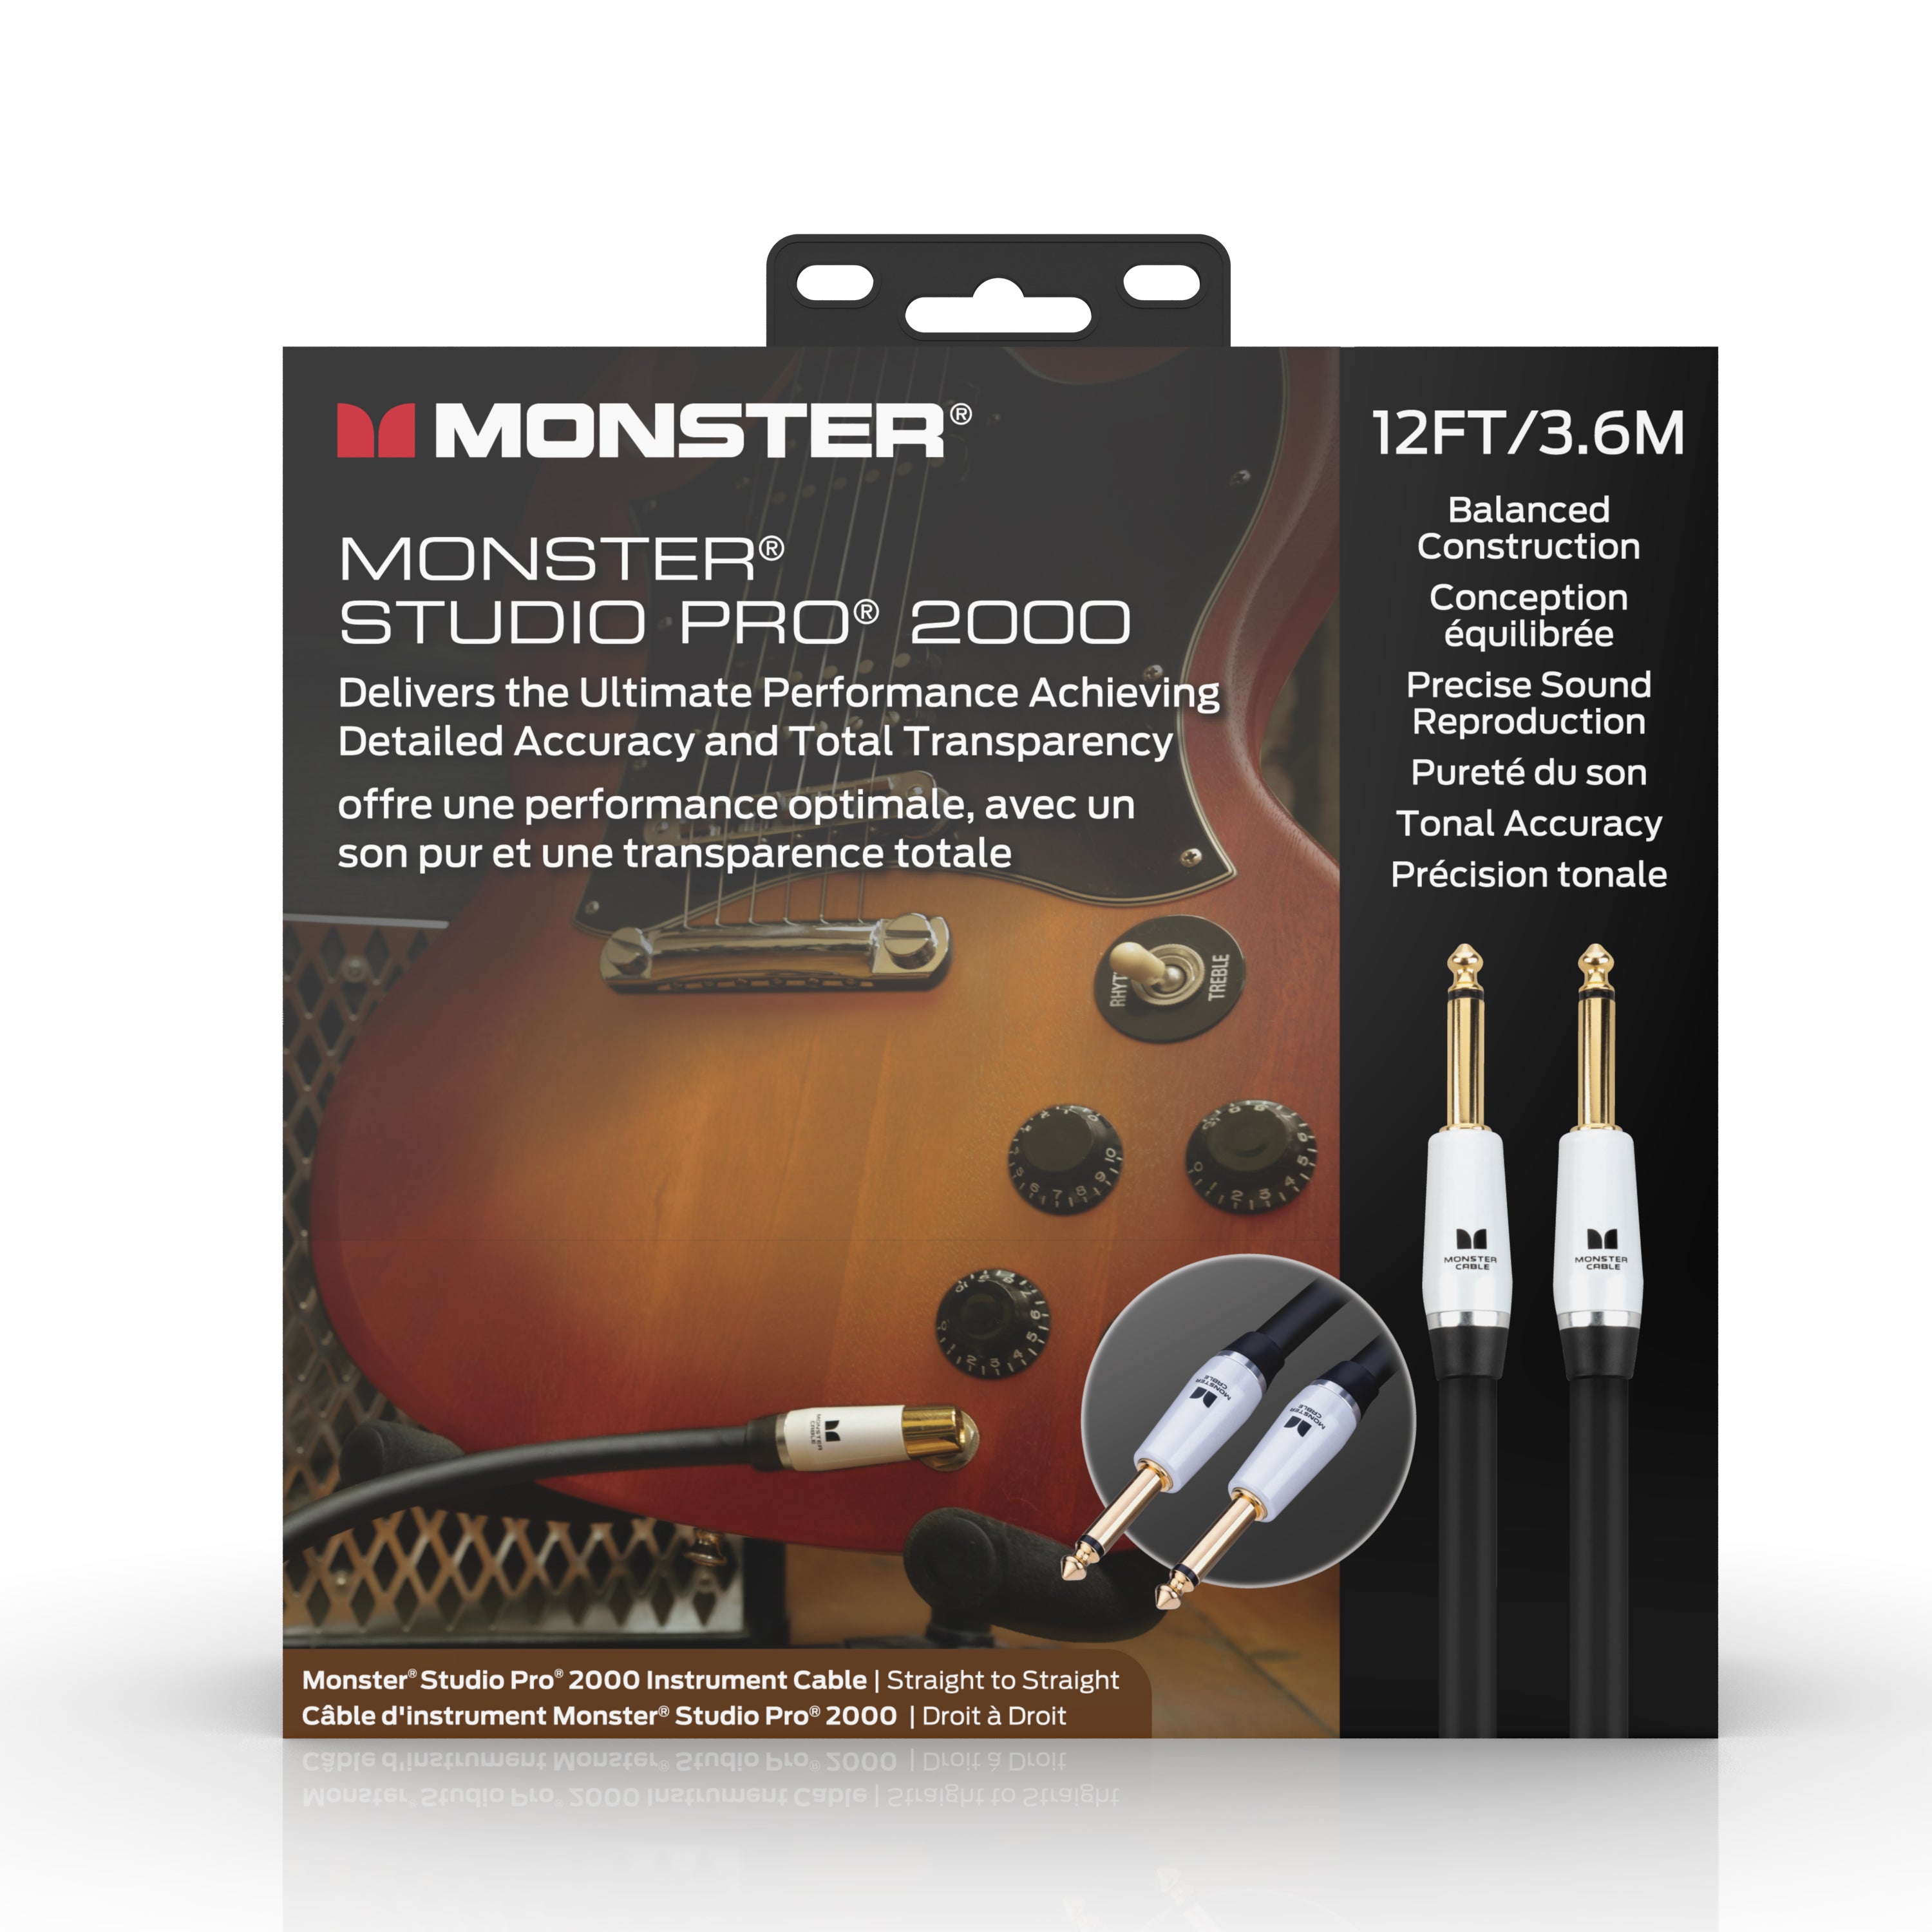 Monster® Prolink Studio Pro 2000 Instrument Cable - HIENDGUITAR Straight-straight / 12ft(3.6m) Straight-straight Monstercable Cables